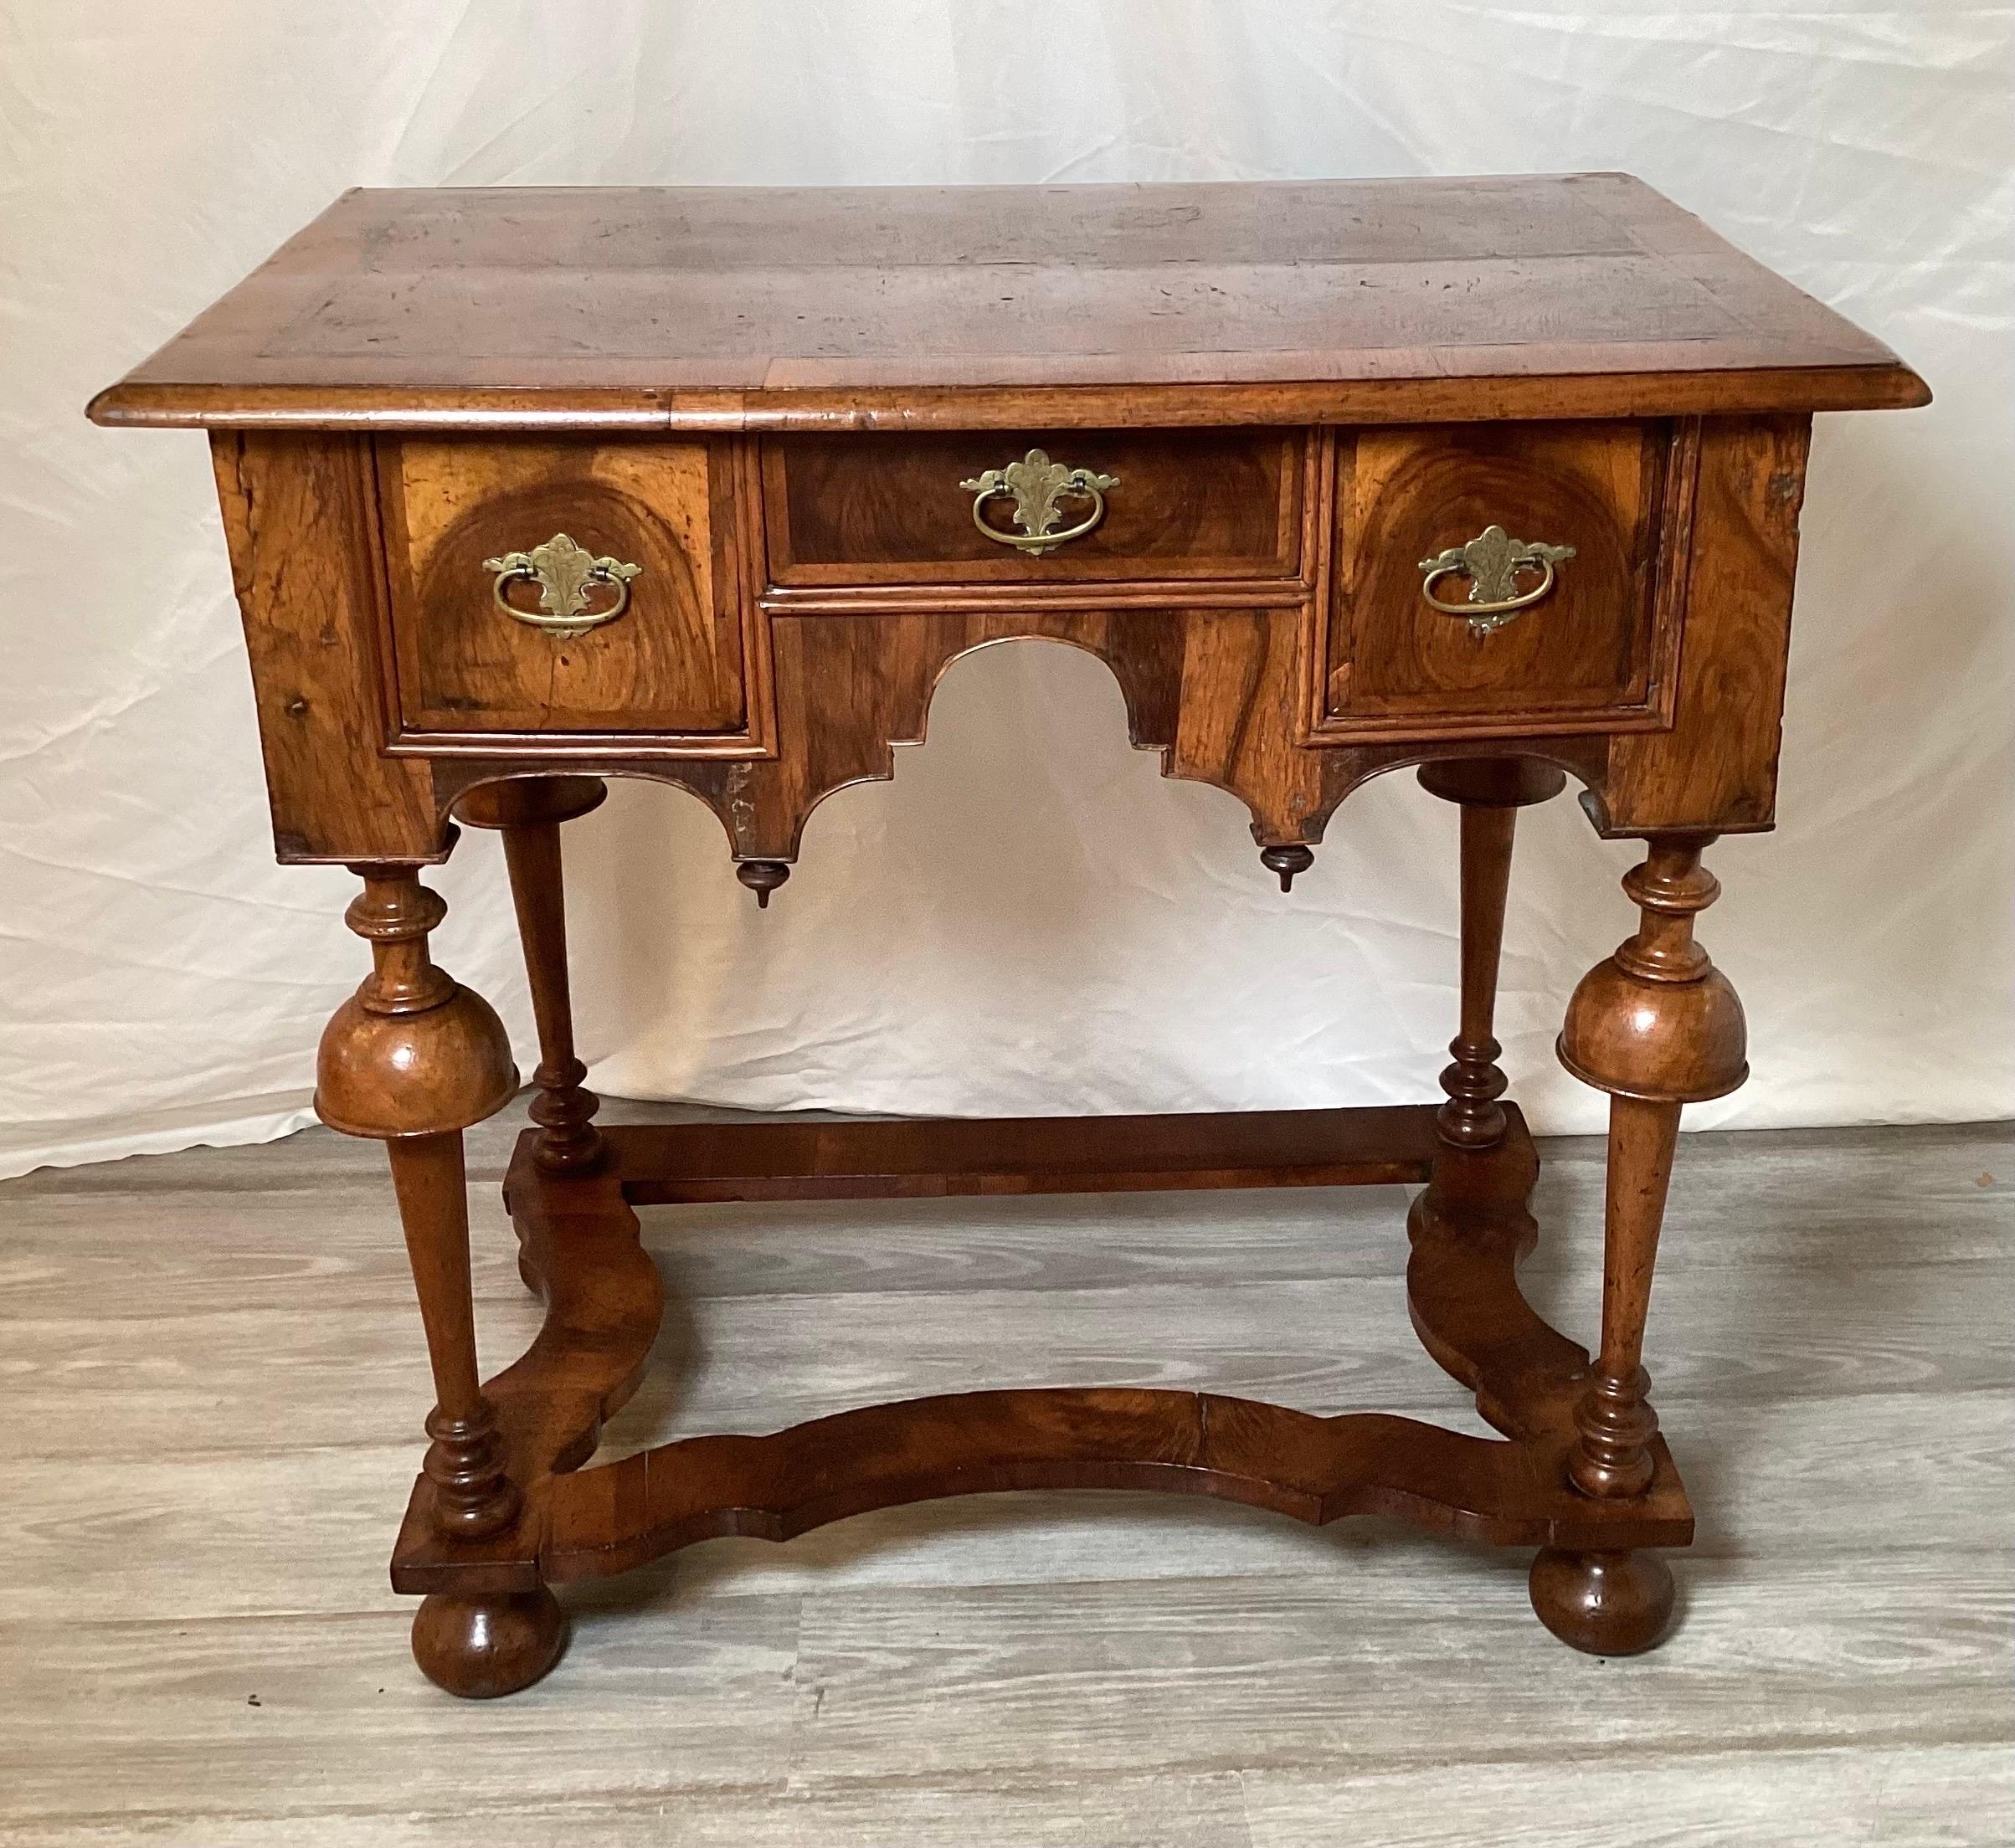 A rare and original 1715 William and Mary burl walnut lowboy. The three drawer case resting on hand turned trumpet form legs. Original hardware.